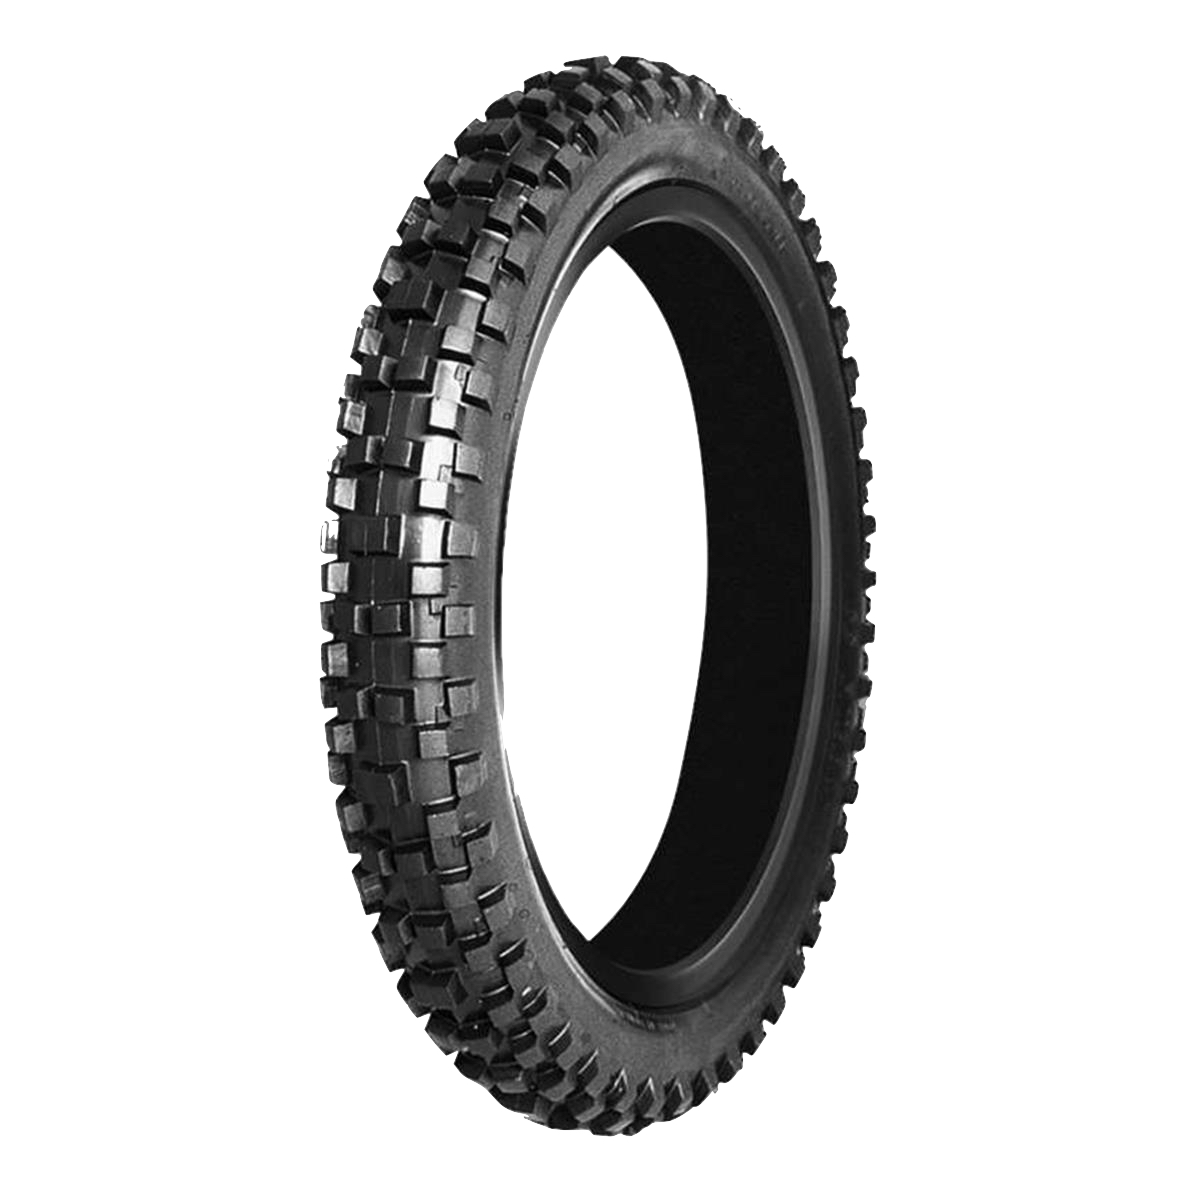 FRONT TIRE 2.50-14